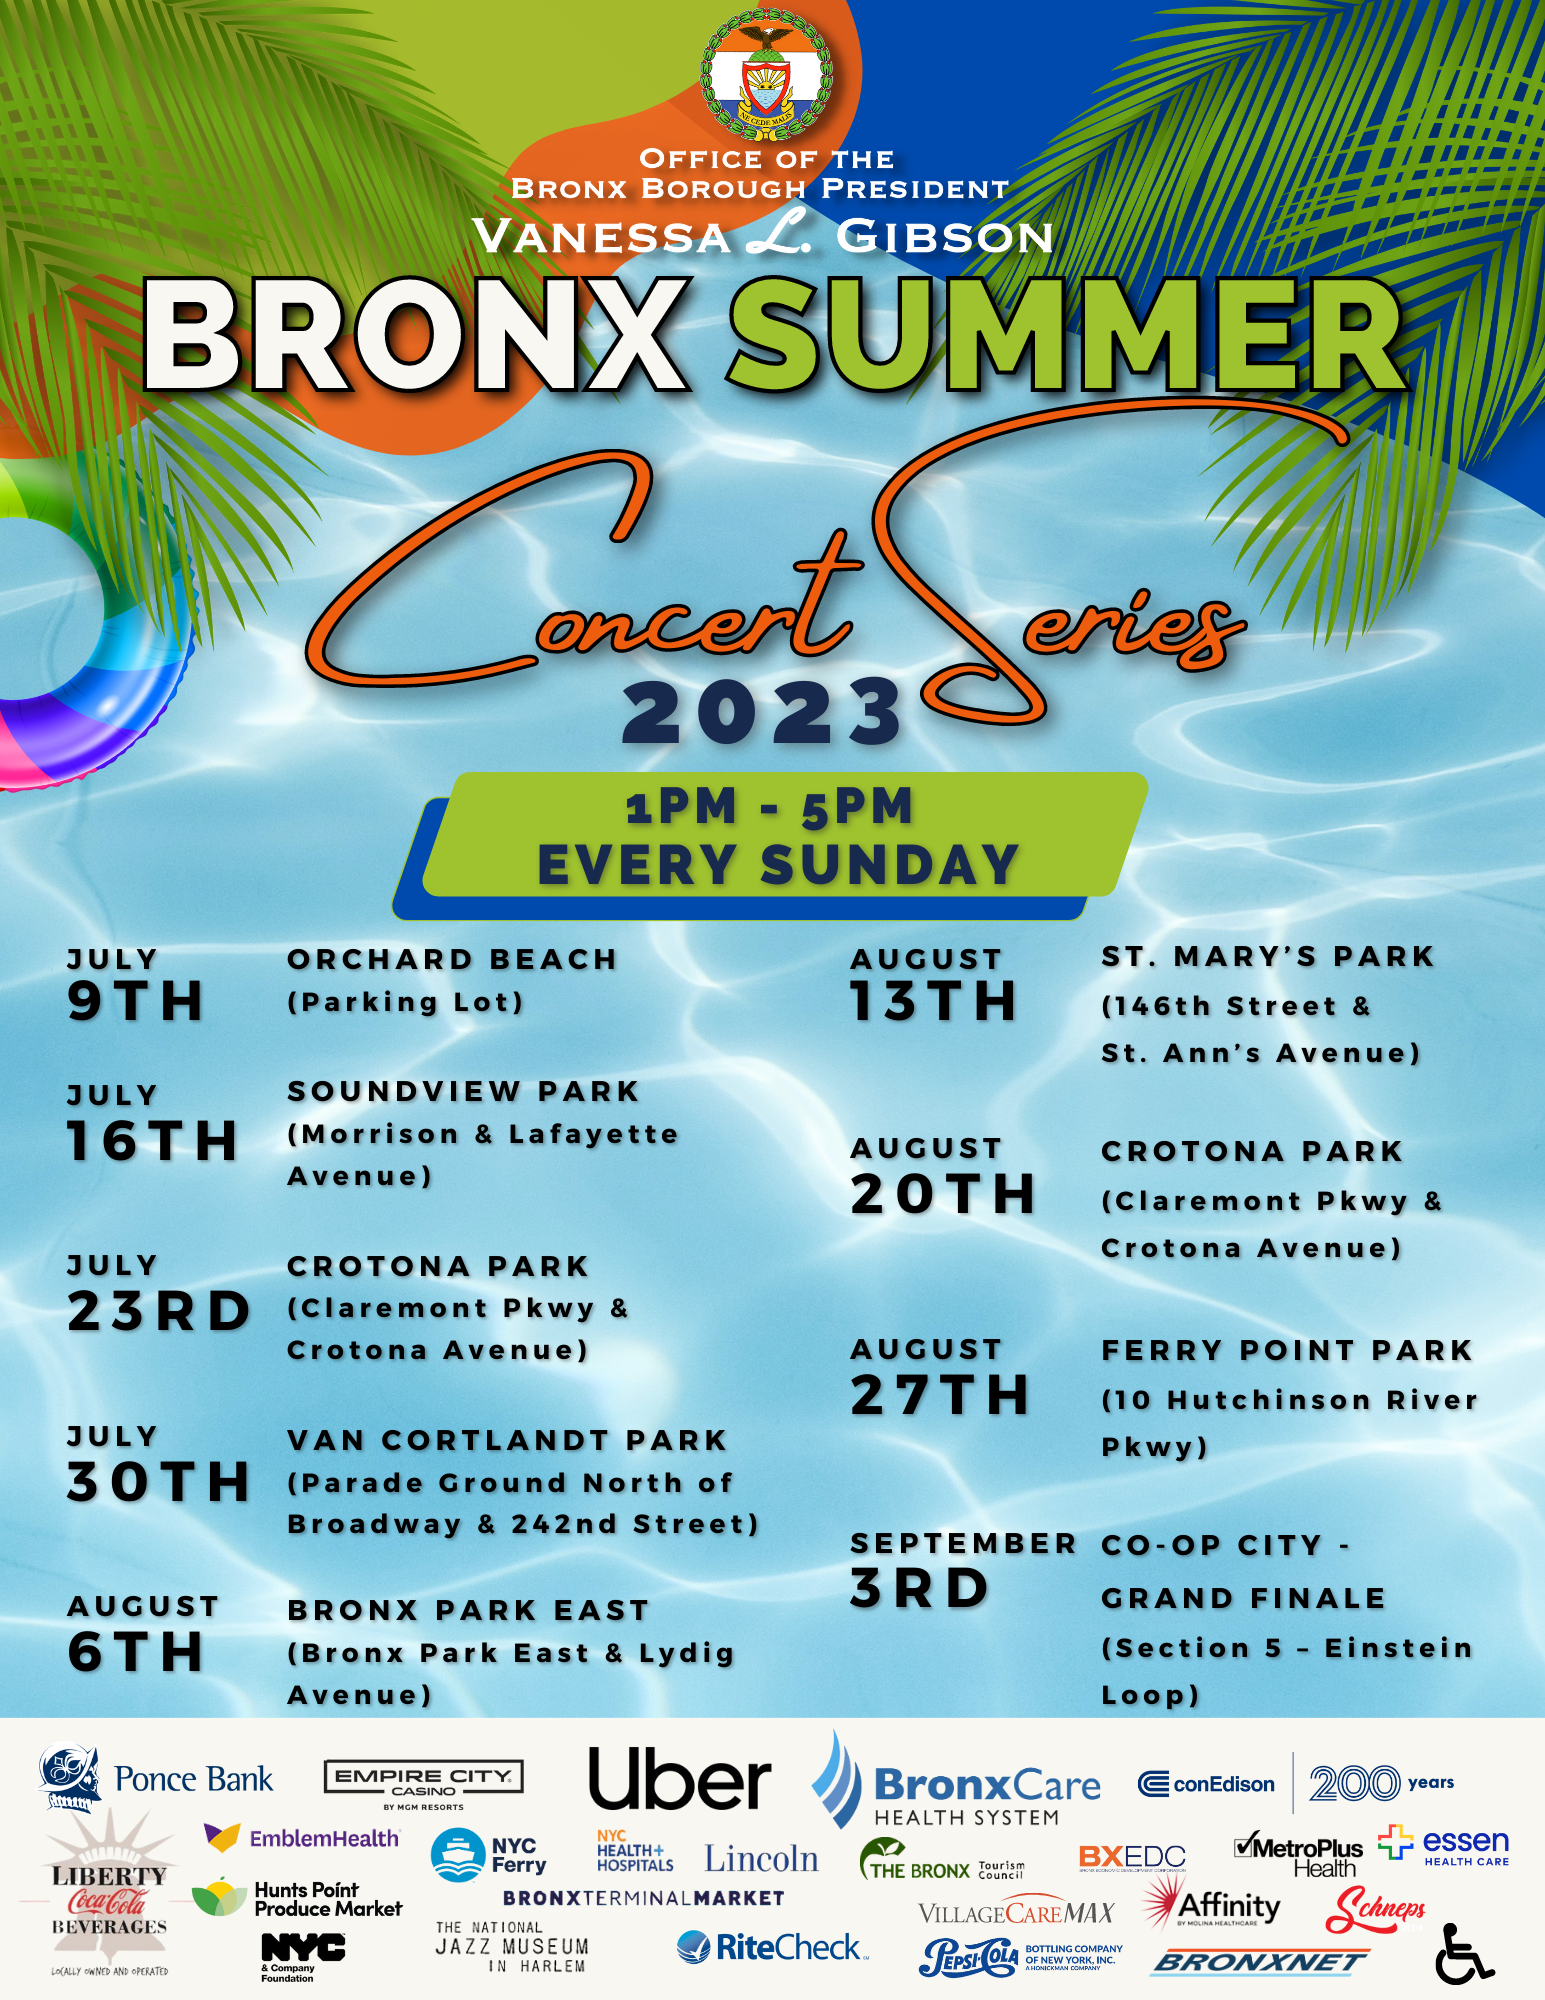 Flyer for the 2023 Bronx Summer Concert Series in English.